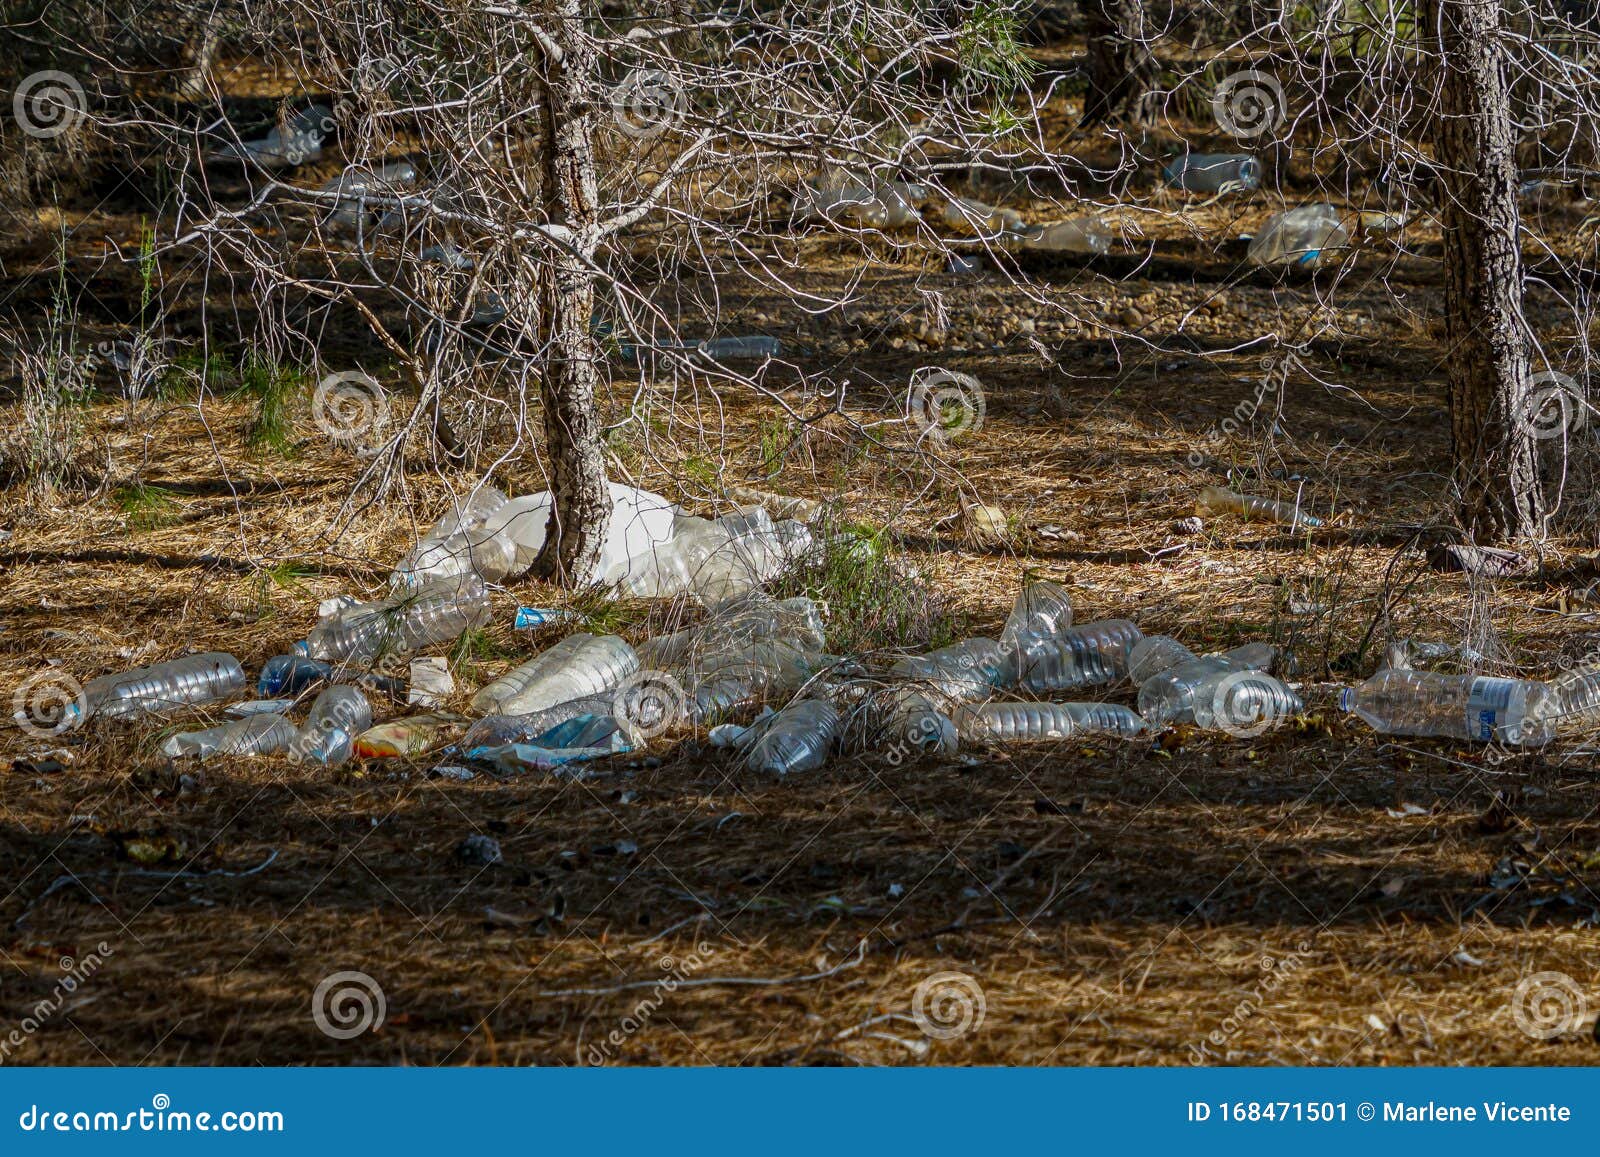 photo complaint. crowd of plastic bottles in the pine forest of coto cuadros. murcia, spain